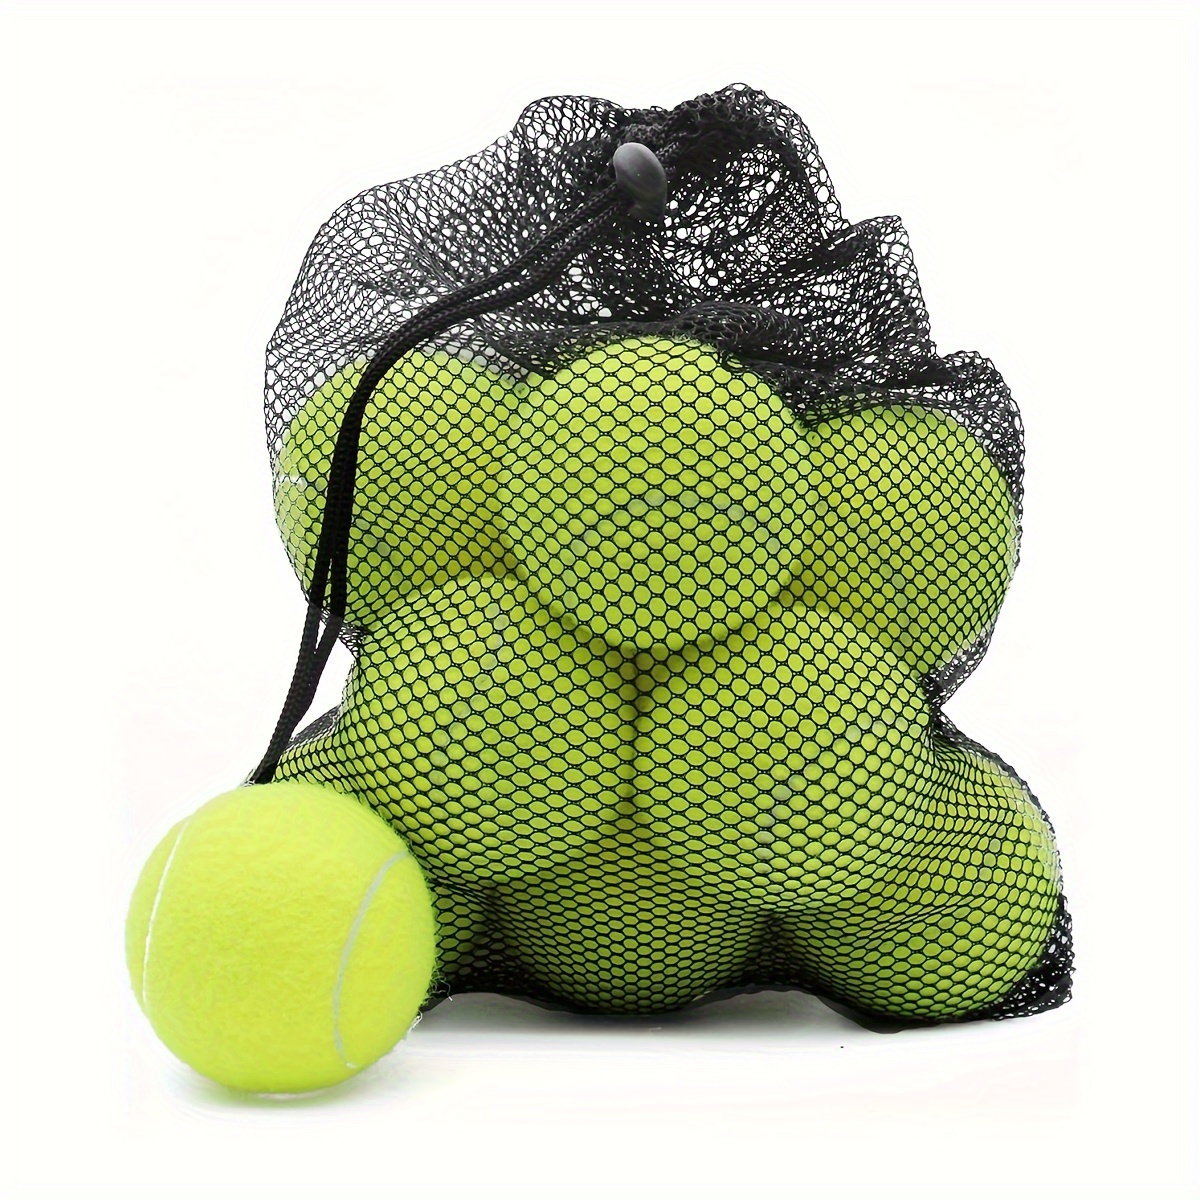 

Tennis Balls, 12 Pack Tennis Balls For Dogs, Pet Dog Playing Balls, Come With Mesh Bag For Easy Transport, Colorful Easy Catching Pet Dog Balls